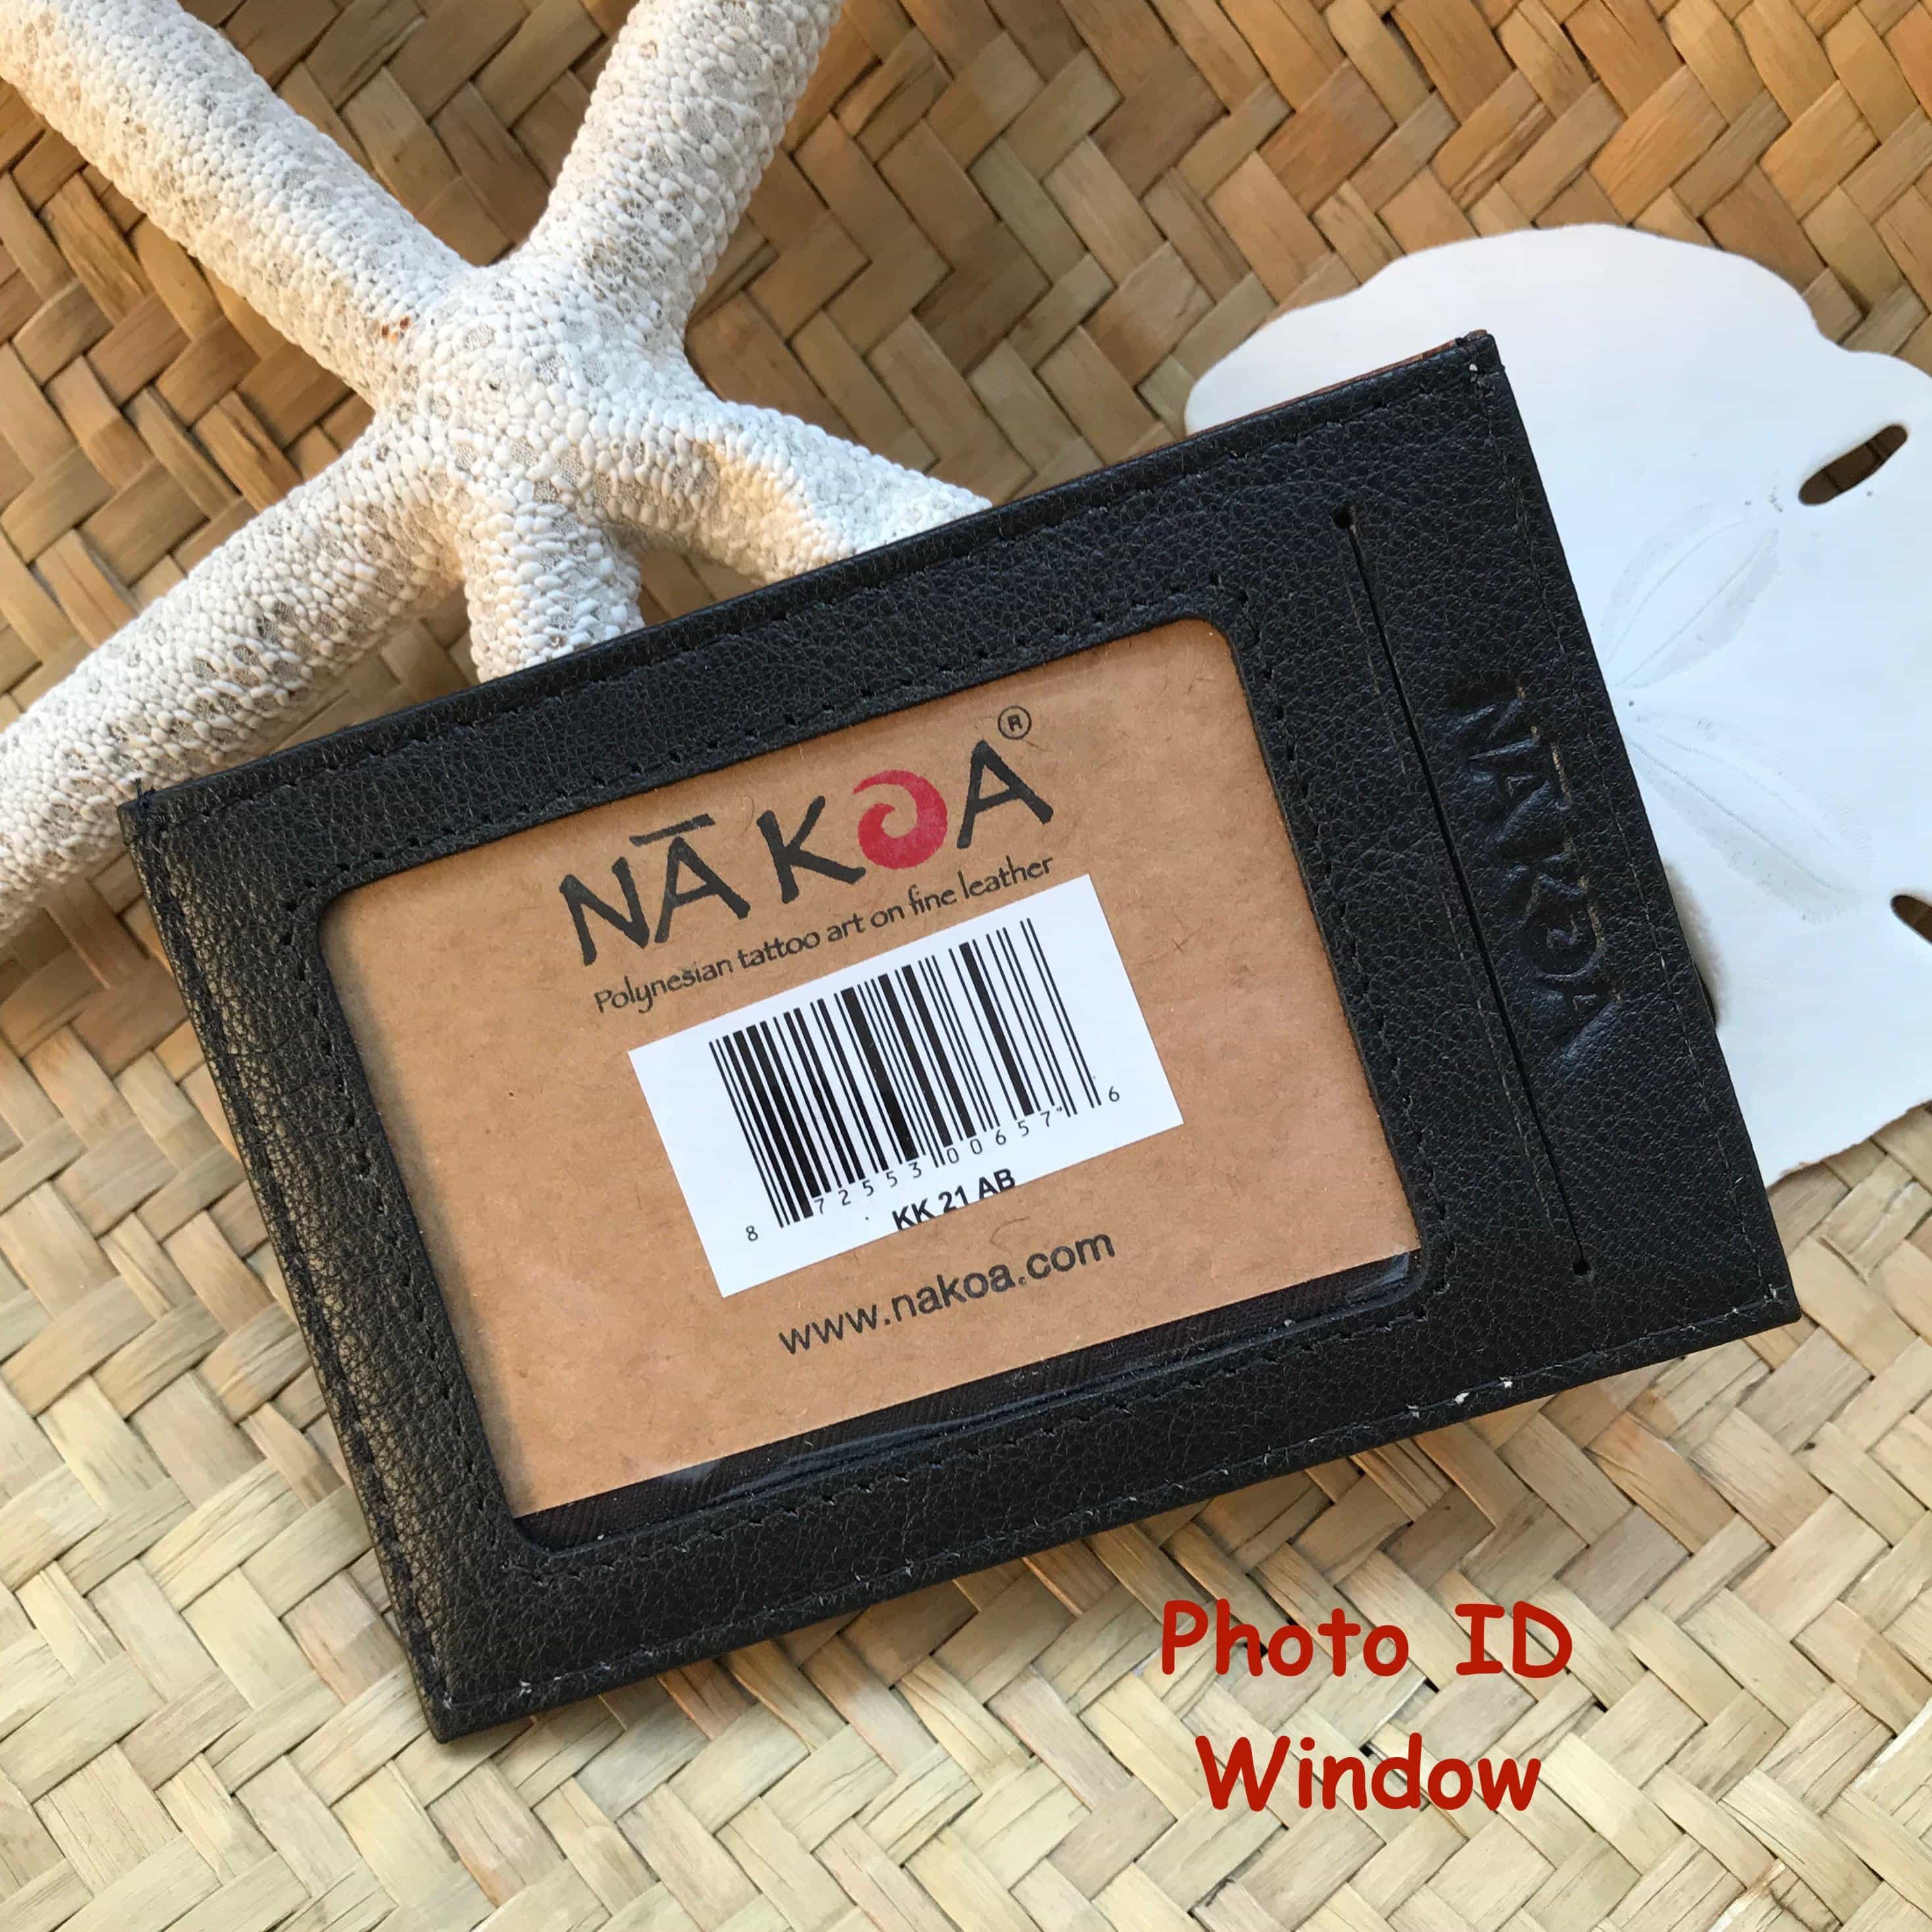 Back view of a Hawaiian leather ID card holder